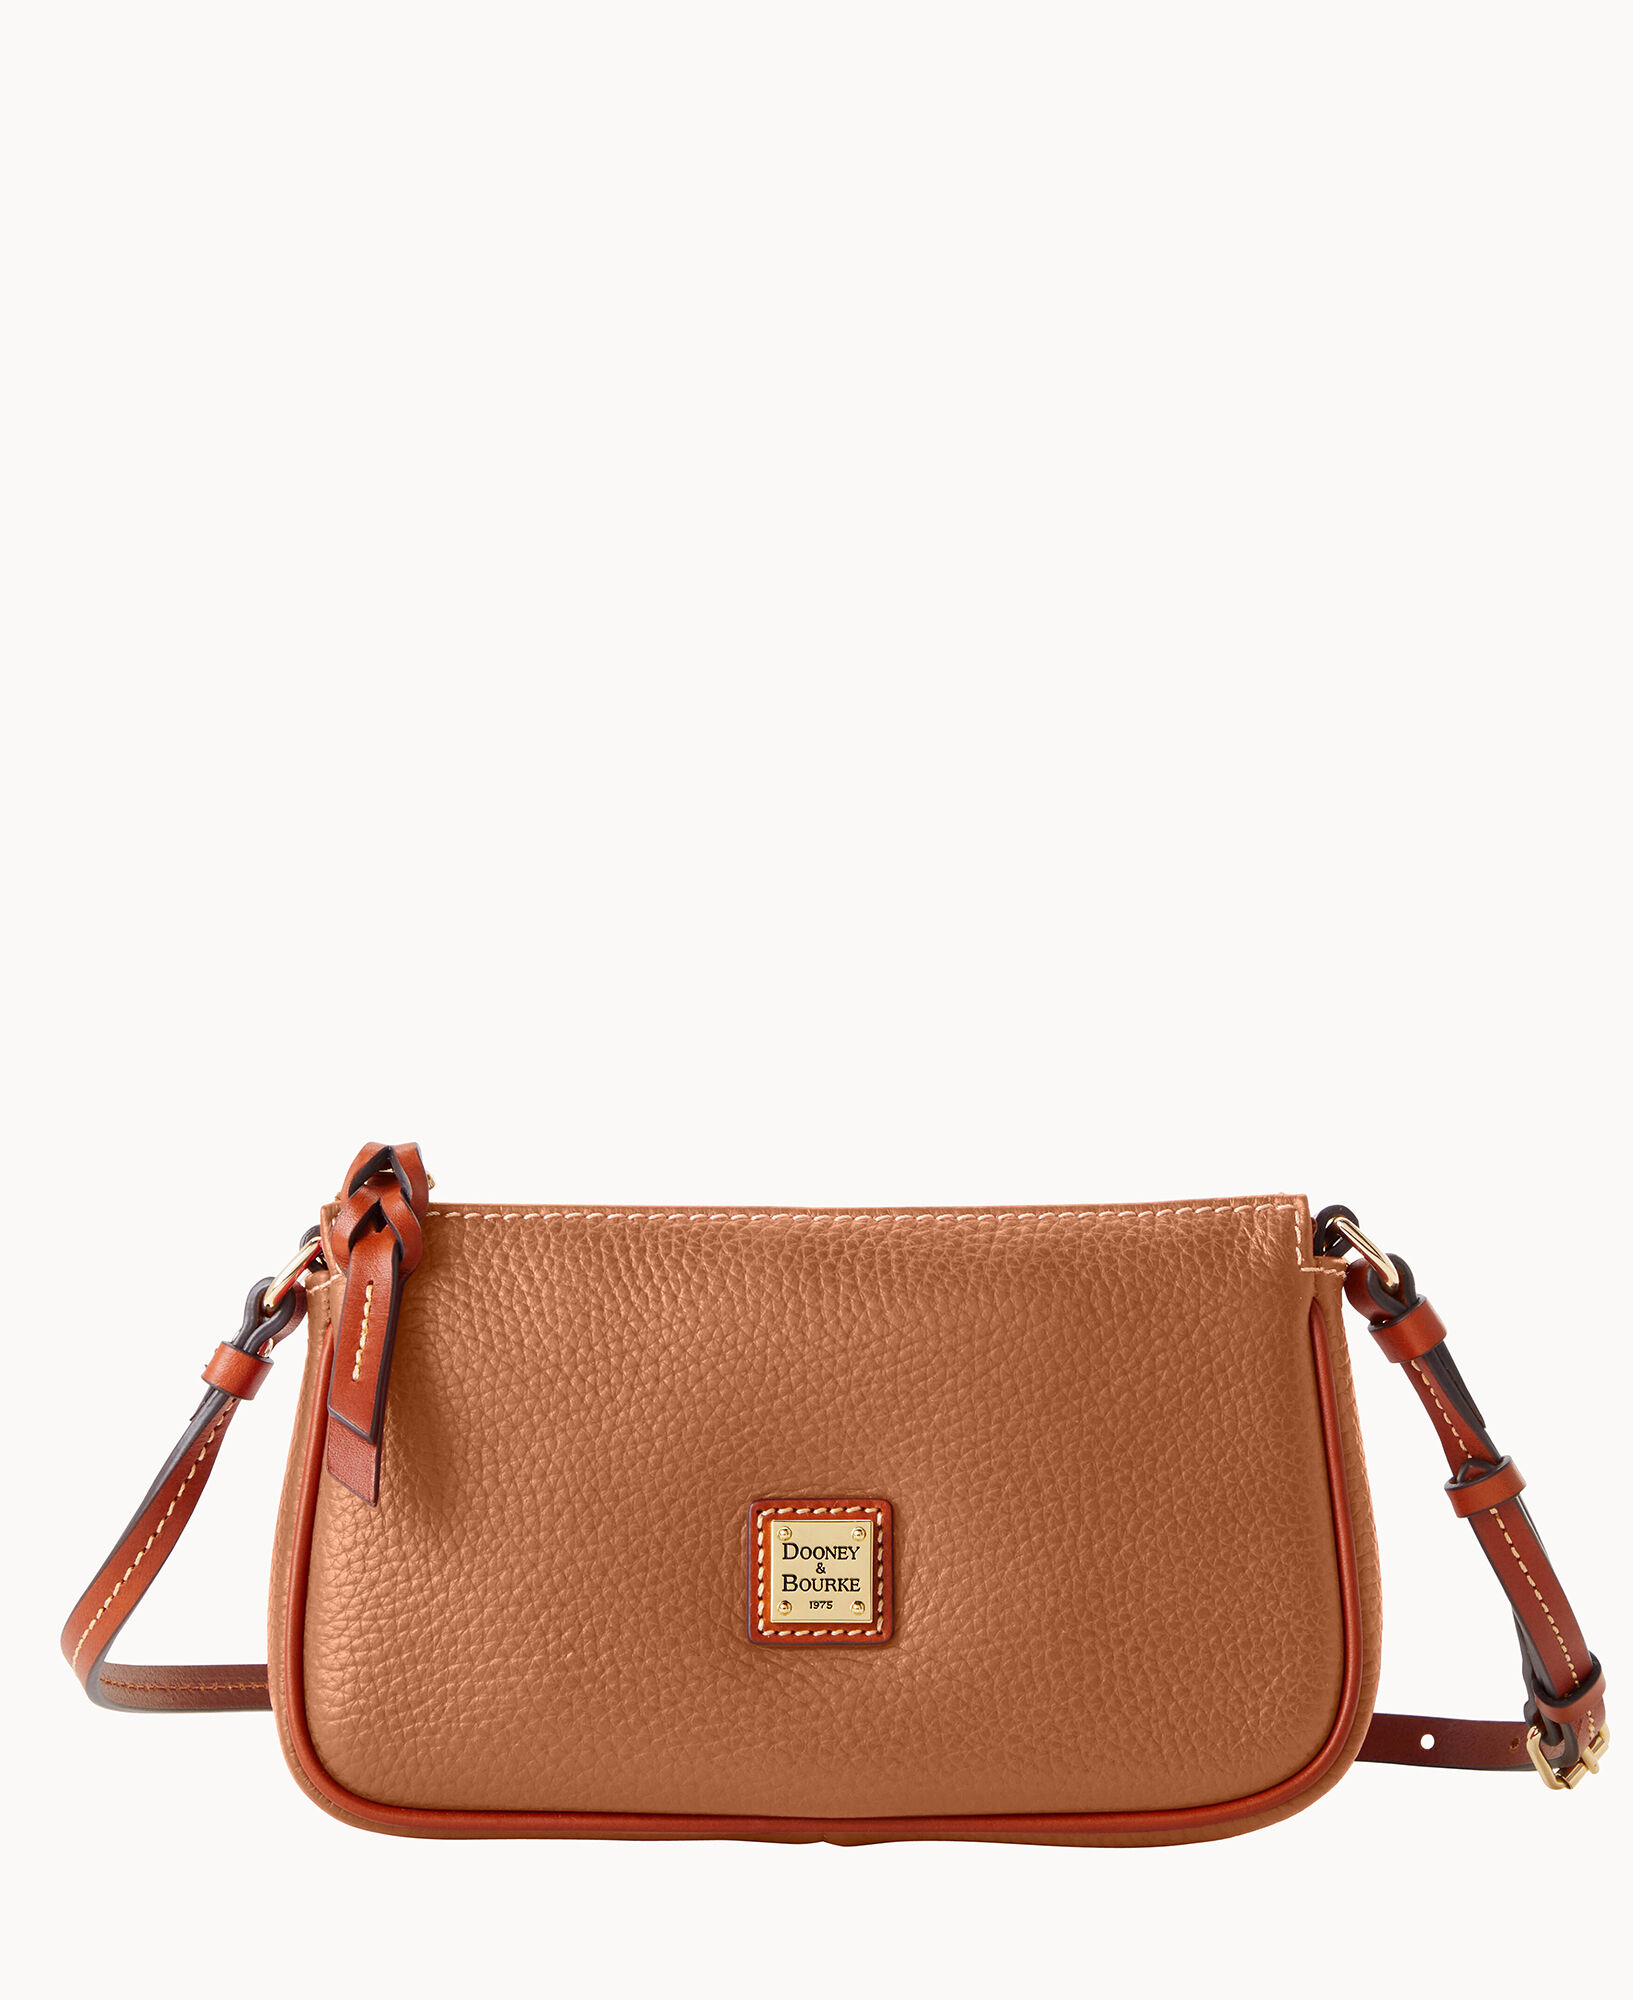 Dooney And Bourke Saffiano Lexi Leather Crossbody Bag In Brown